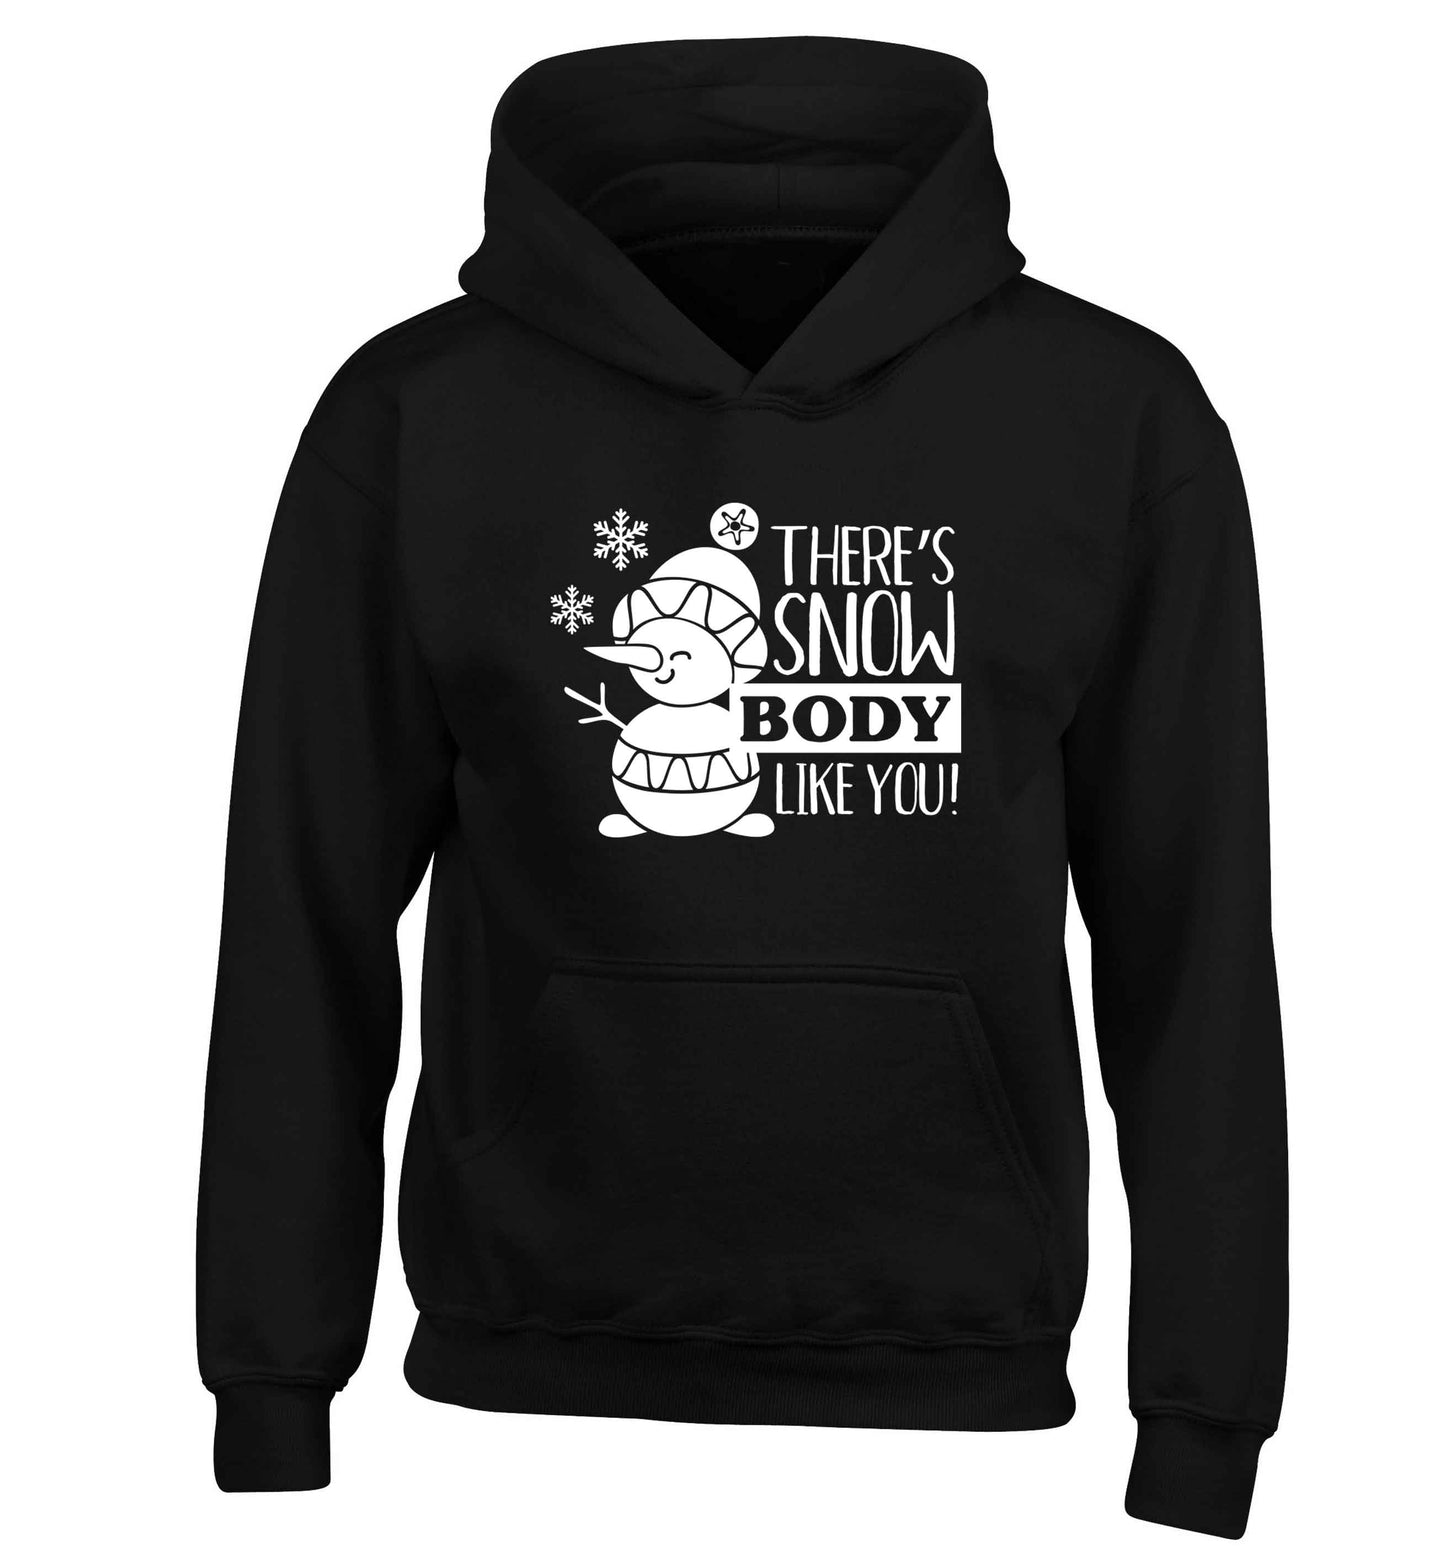 There's snow body like you children's black hoodie 12-13 Years